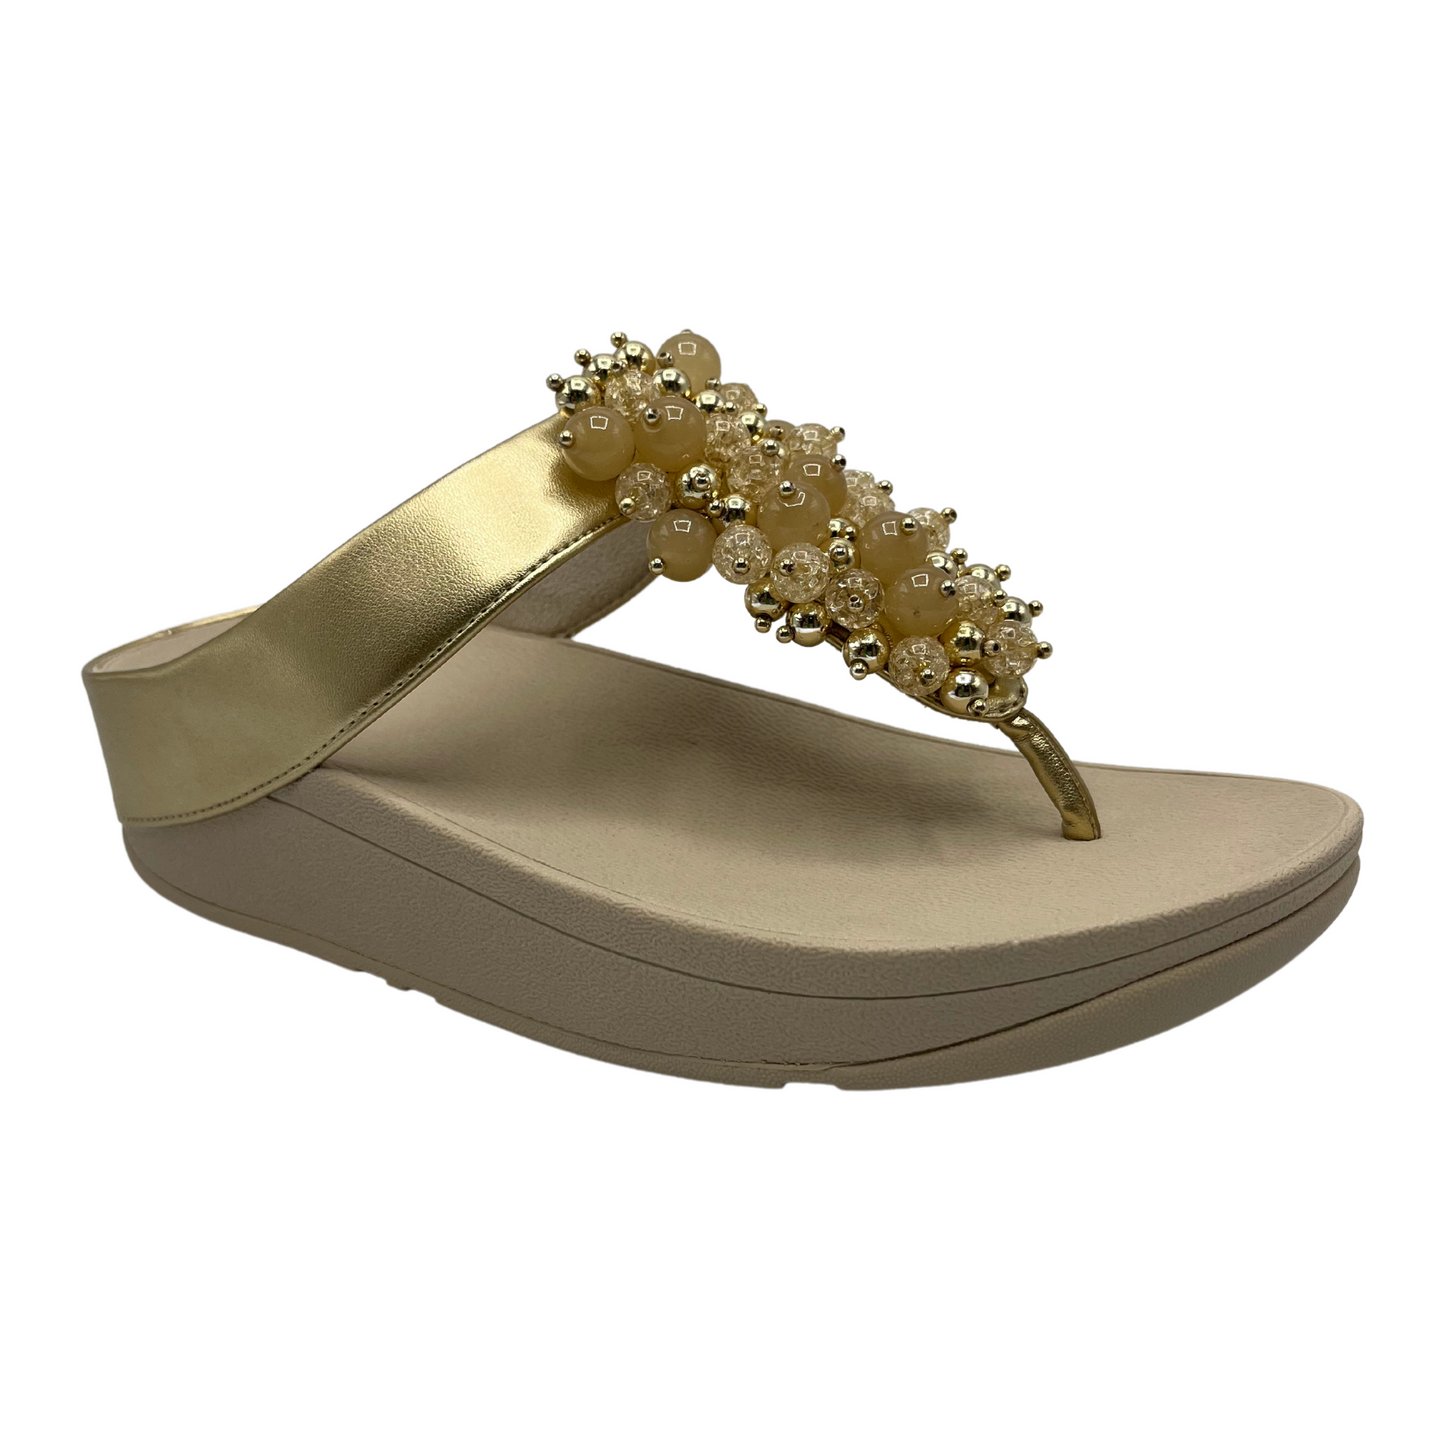 45 degree angled view of gold sandals with round embellishments on front strap and lightweight platform sole